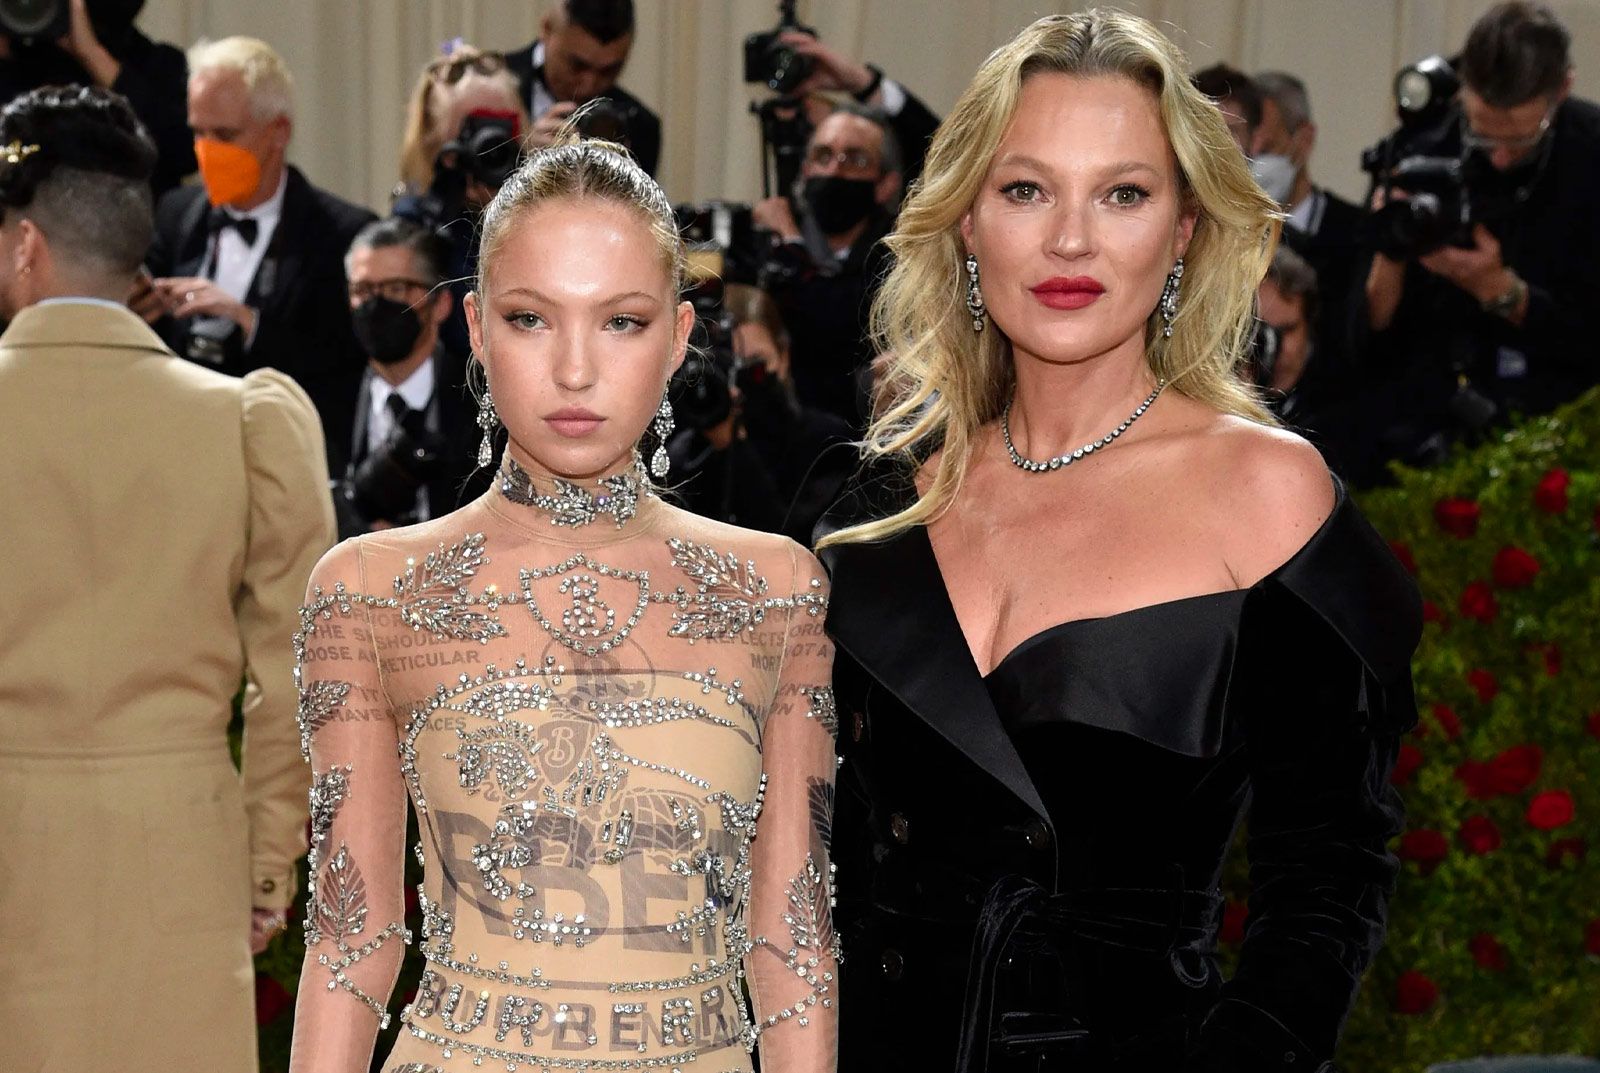 Kate Moss alongside her daughter Lila Grace Moss Hack wearing jewels from A La Vieille Russie at the Met Gala 2022 